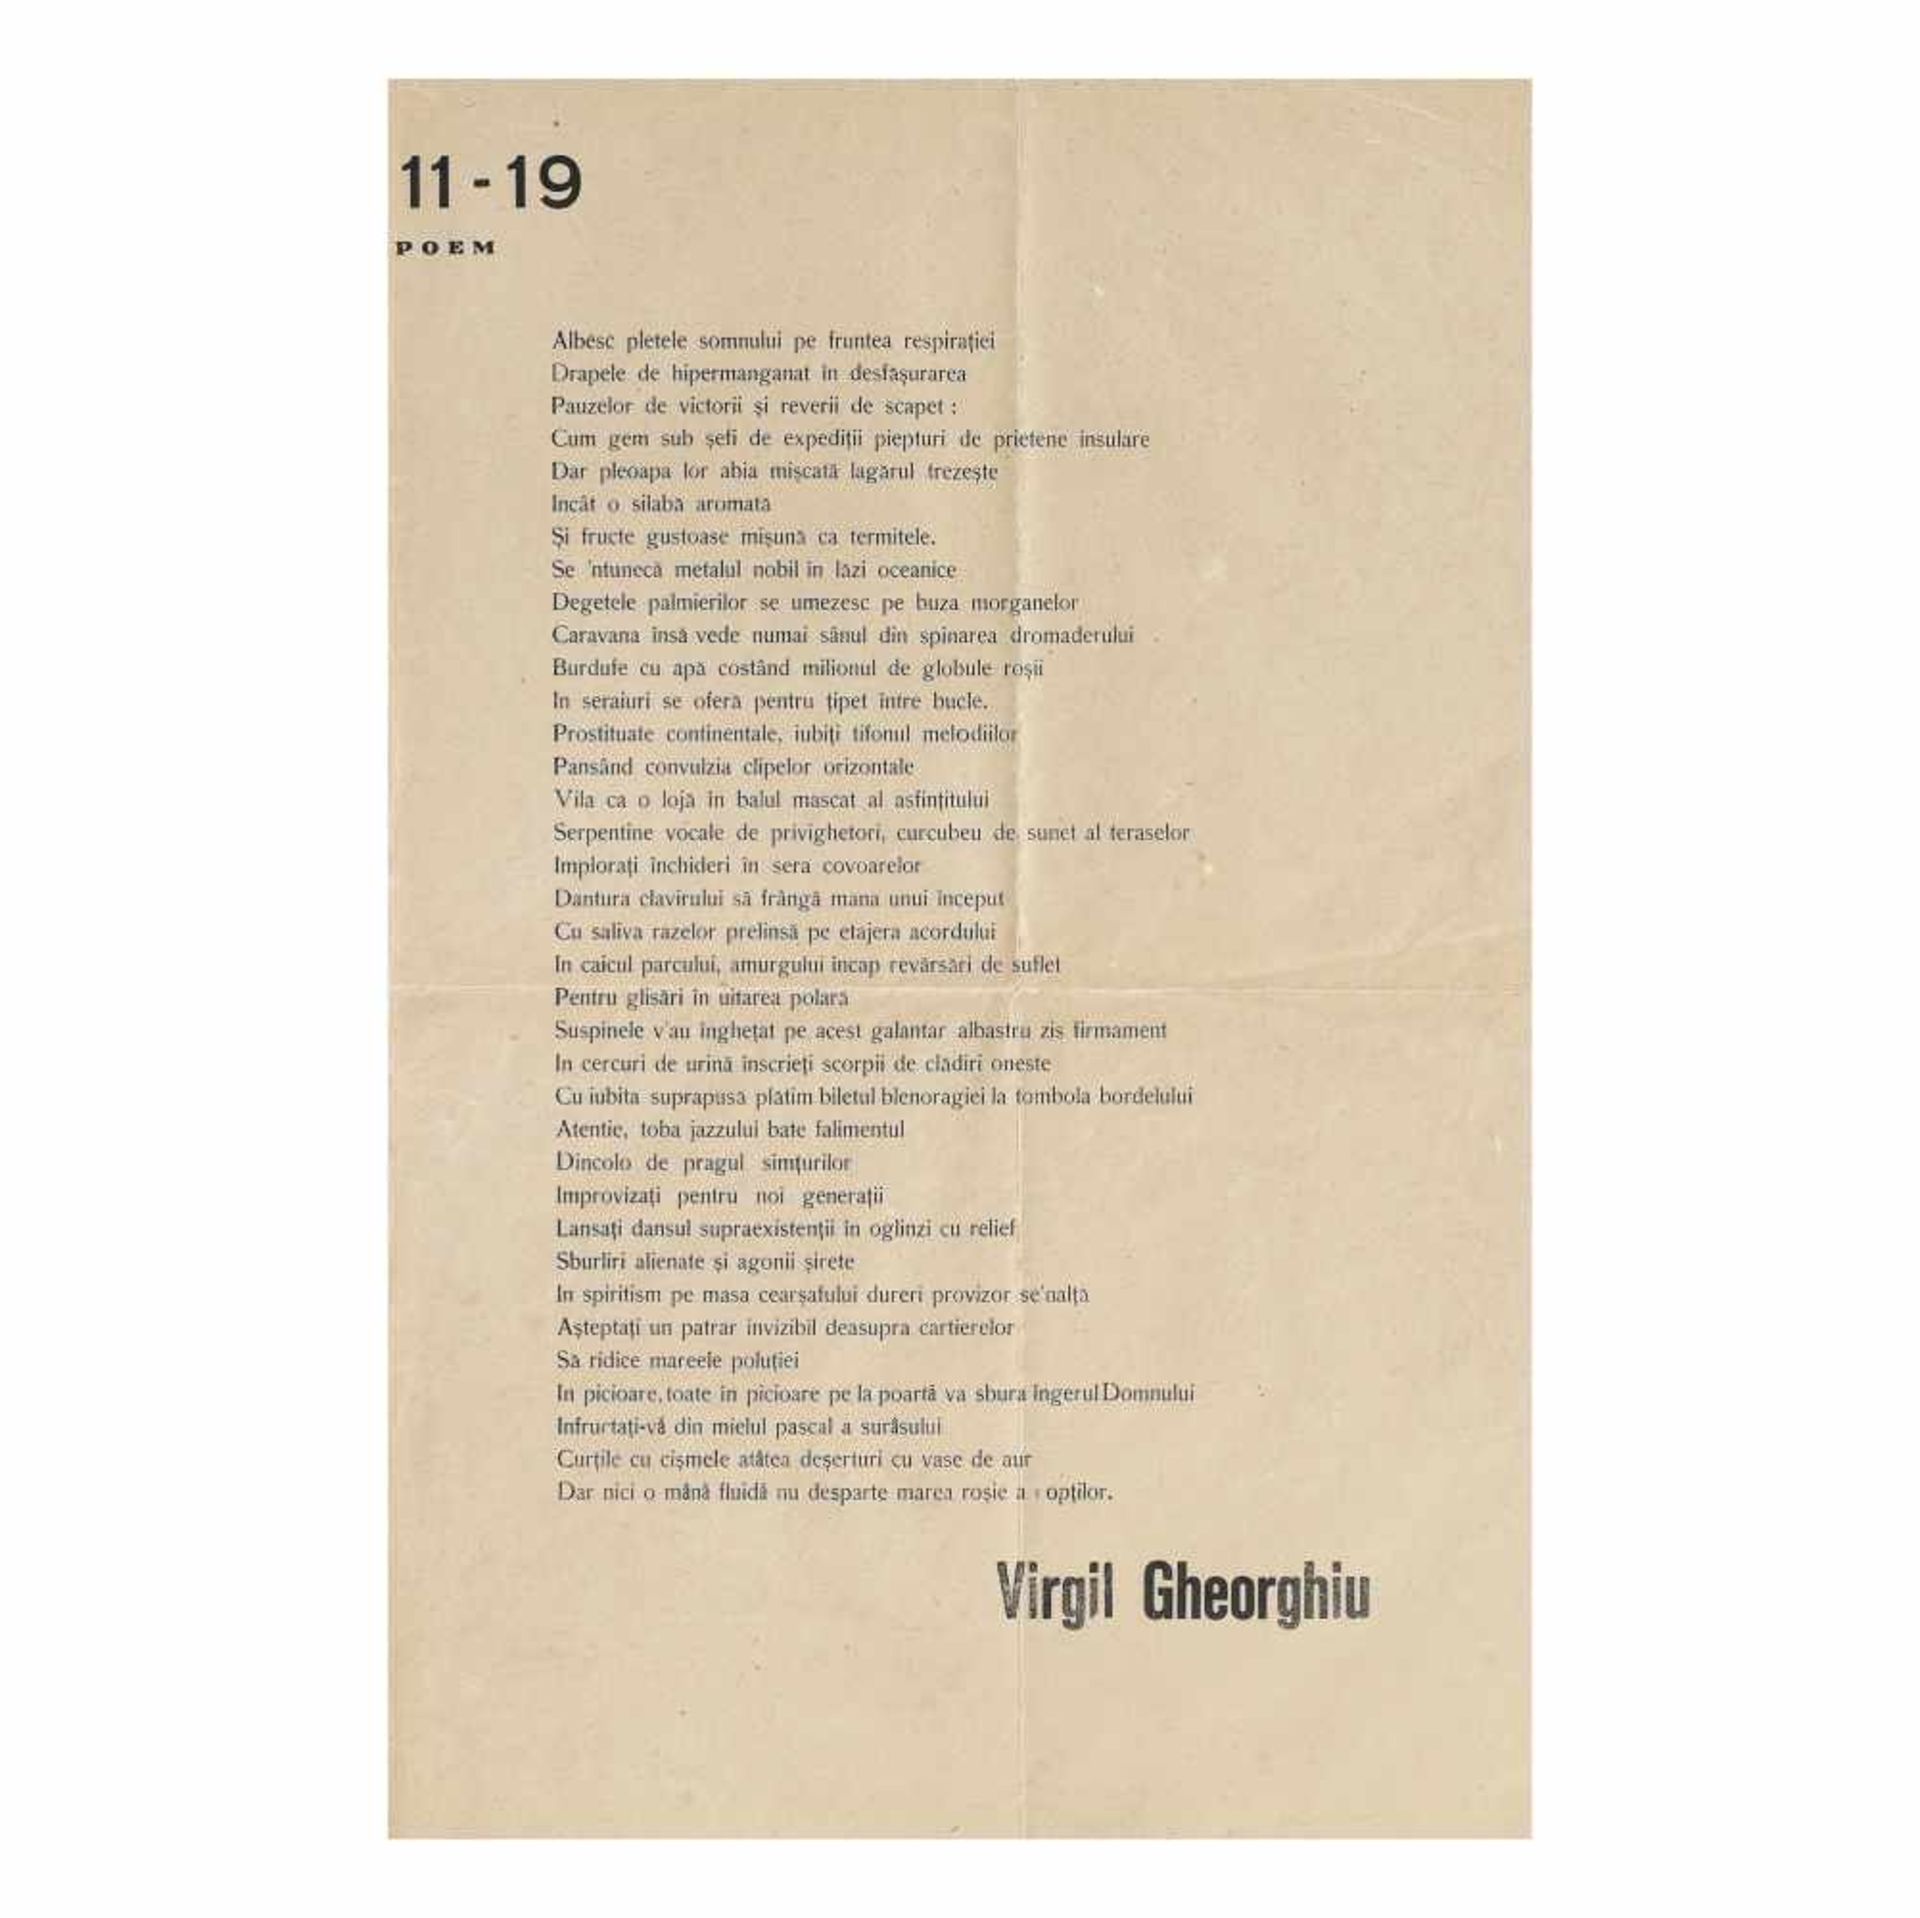 Poem-poster "8-11-19", by Virgil Gheorghiu, Bucharest, 1930, very rare, collectible piece